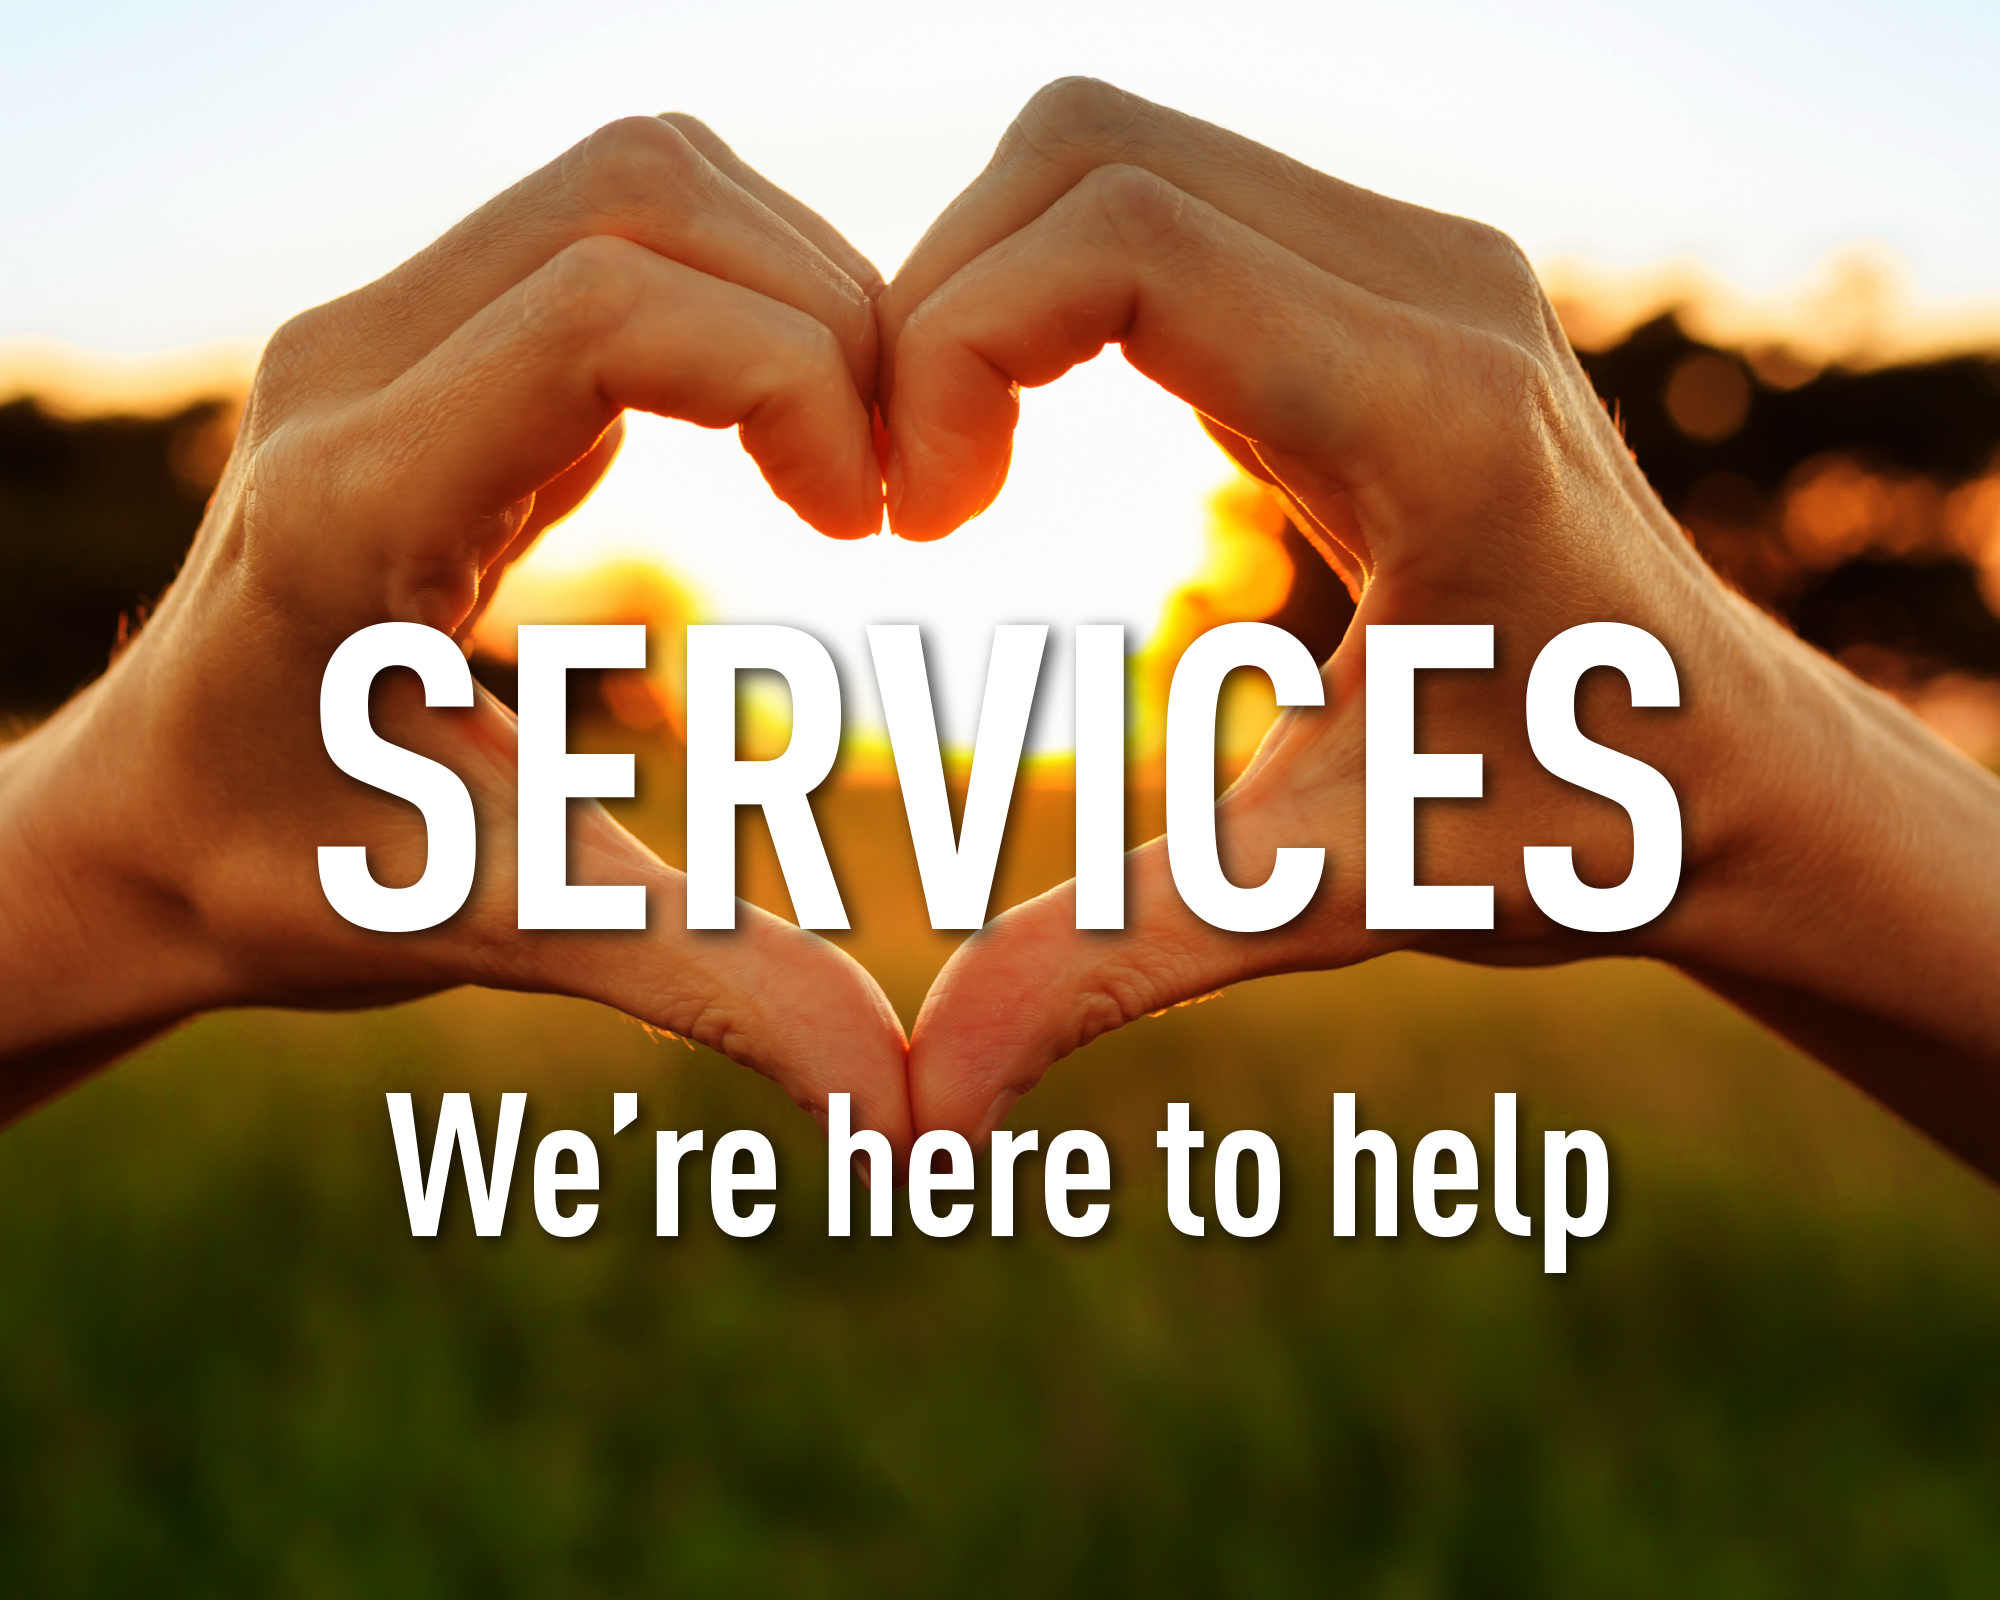 Services. We're here to help